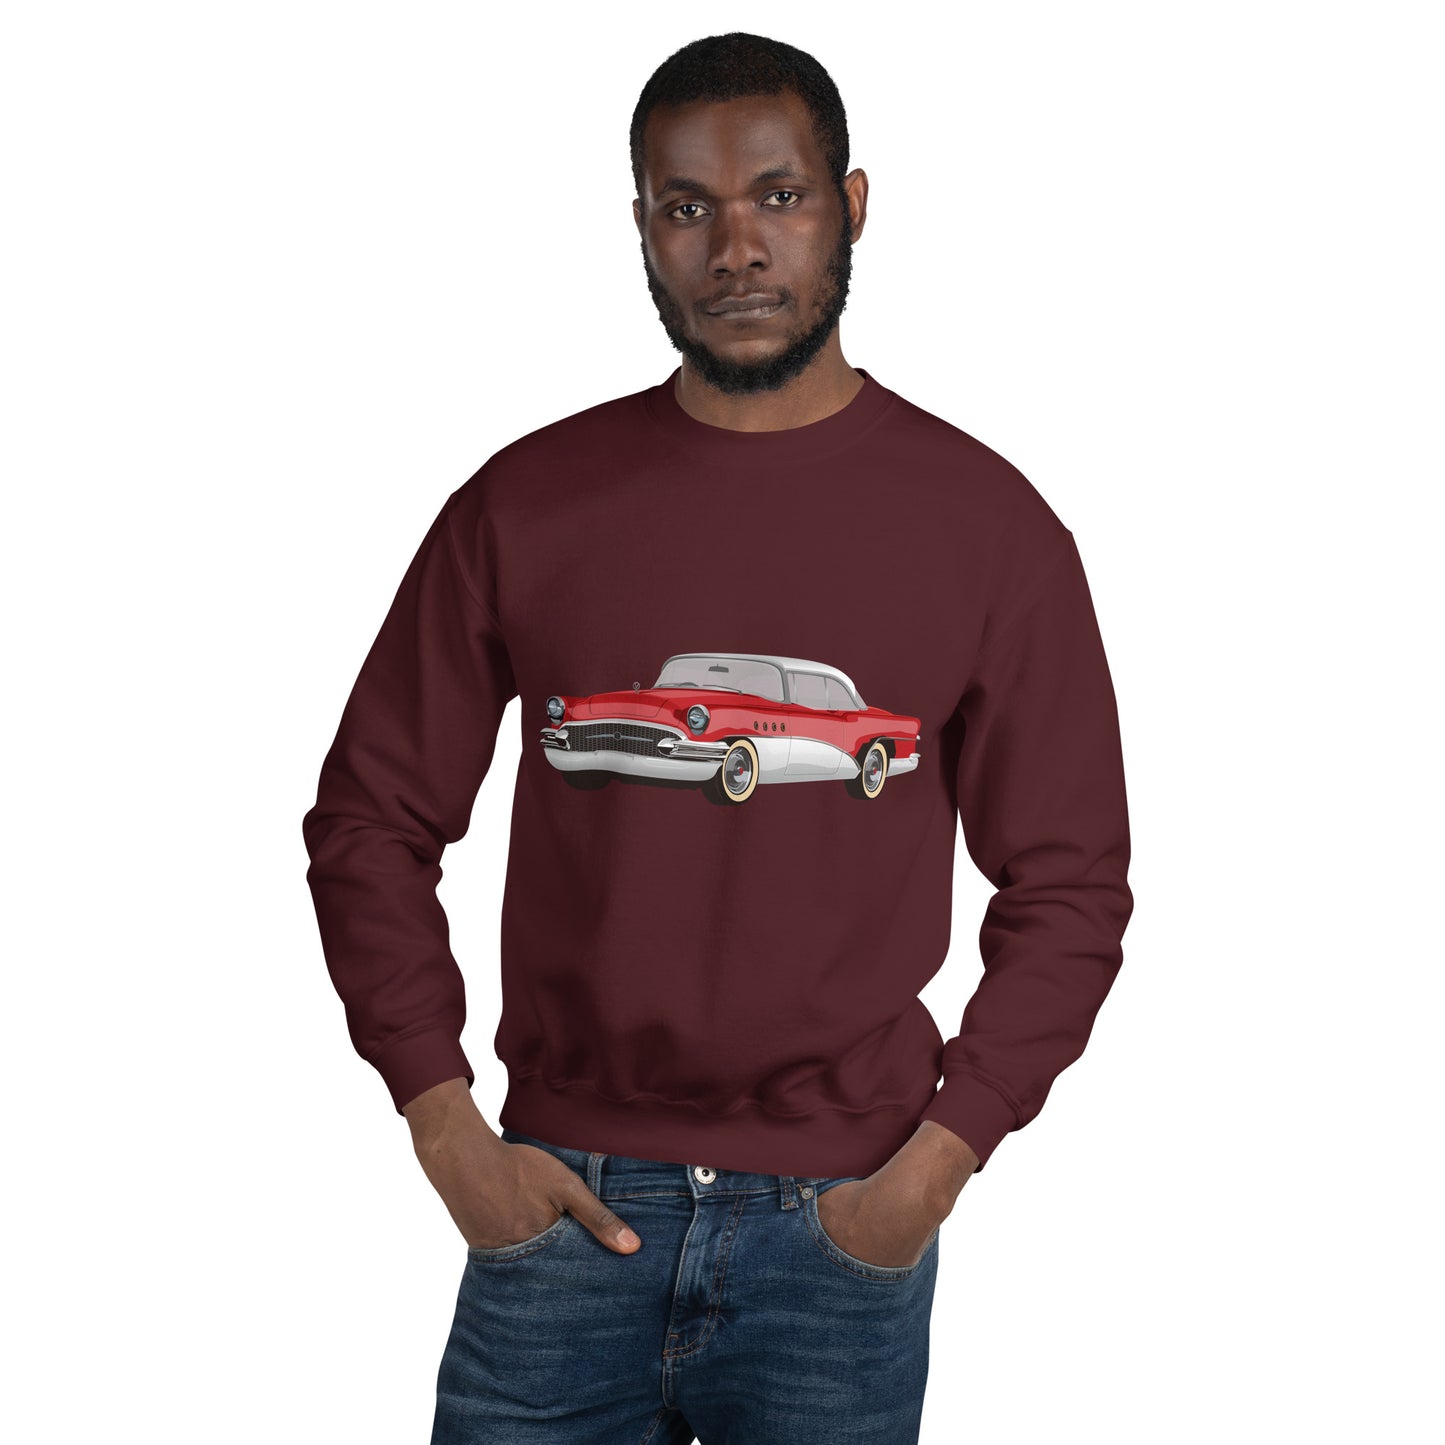 Man with maroon sweatshirt with red chevrolet